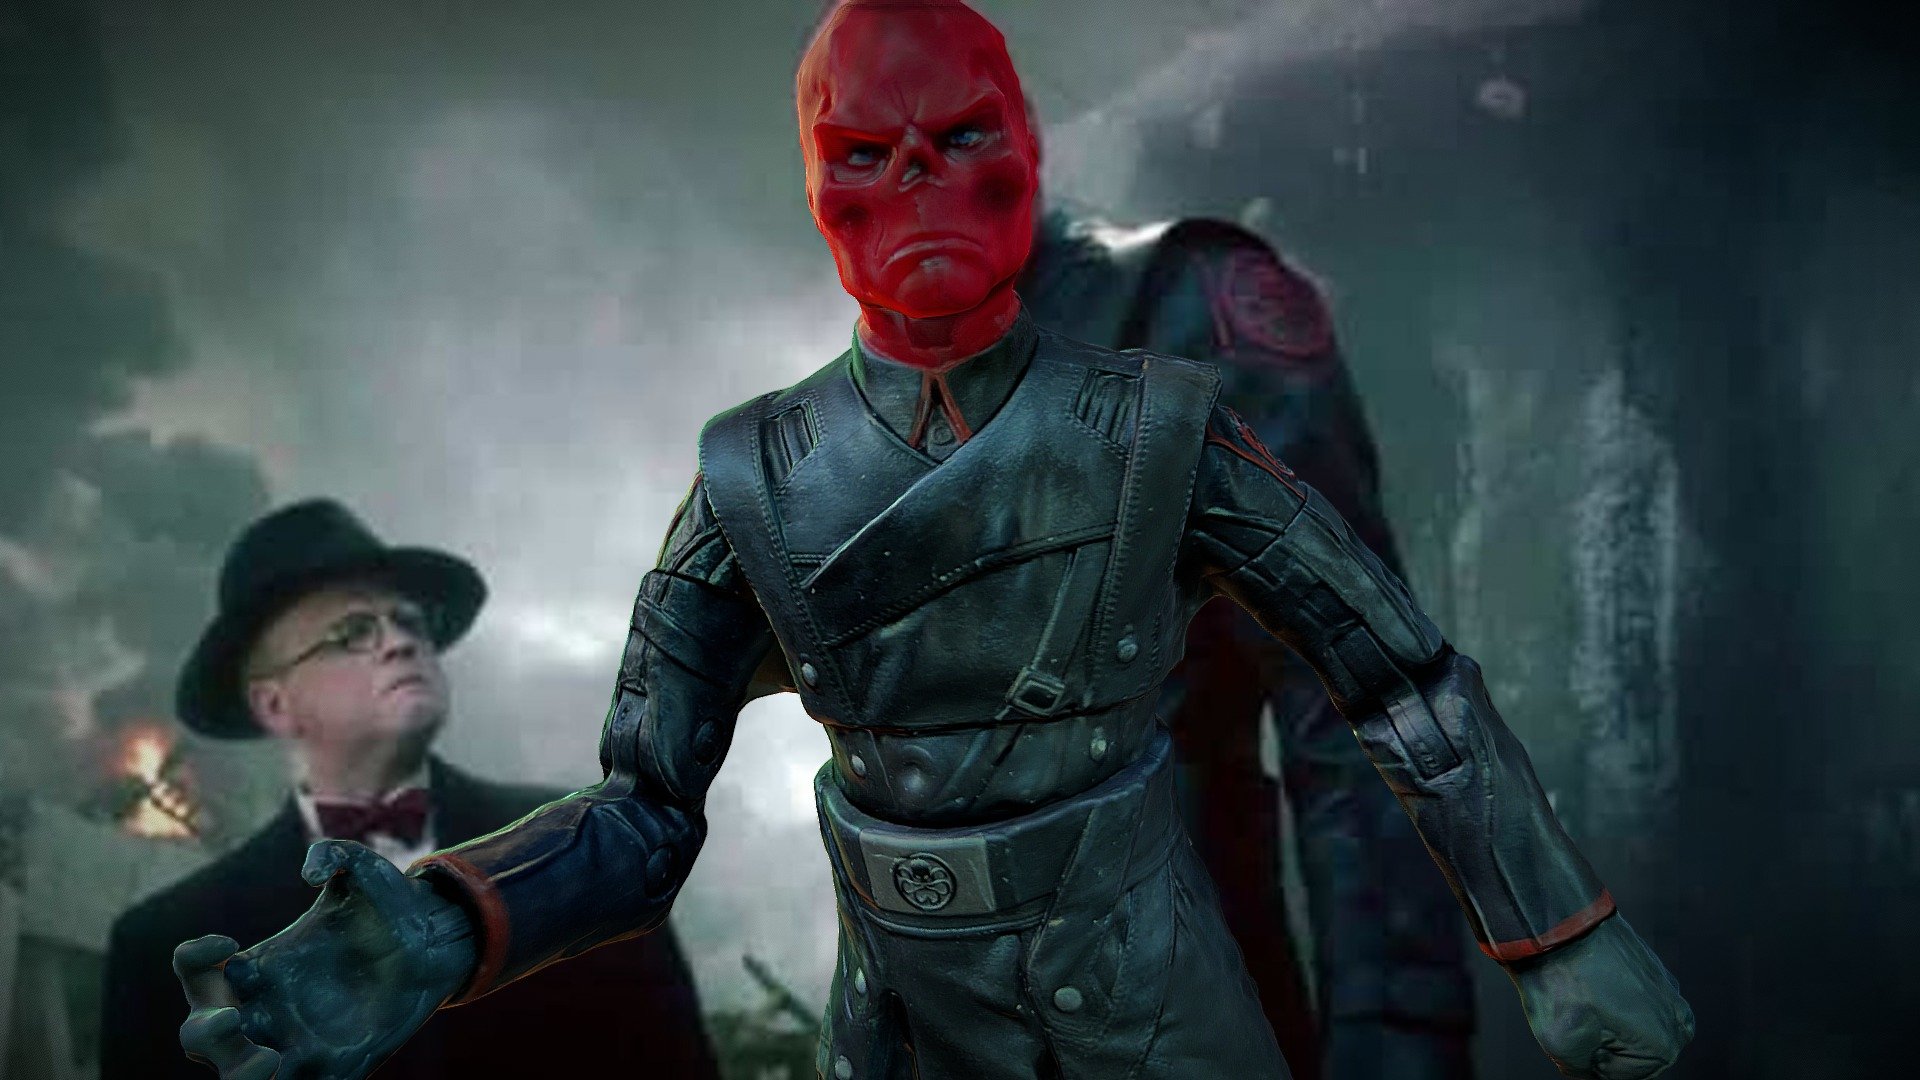 The iconic villain of the Marvel universe to life with this highly detailed 3D scan of the Red Skull action figure. Captured using state-of-the-art technology, every crease, groove and texture of the figure has been meticulously reproduced to offer a true-to-life representation. With its striking red skull appearance, intricate details and lifelike textures, this Red Skull action figure is the perfect addition to any Marvel fan's collection. Explore and admire every angle in stunning 3D, and get up close and personal with one of Marvel's most notorious villains. Perfect for collectors, fans, and enthusiasts alike 3d model